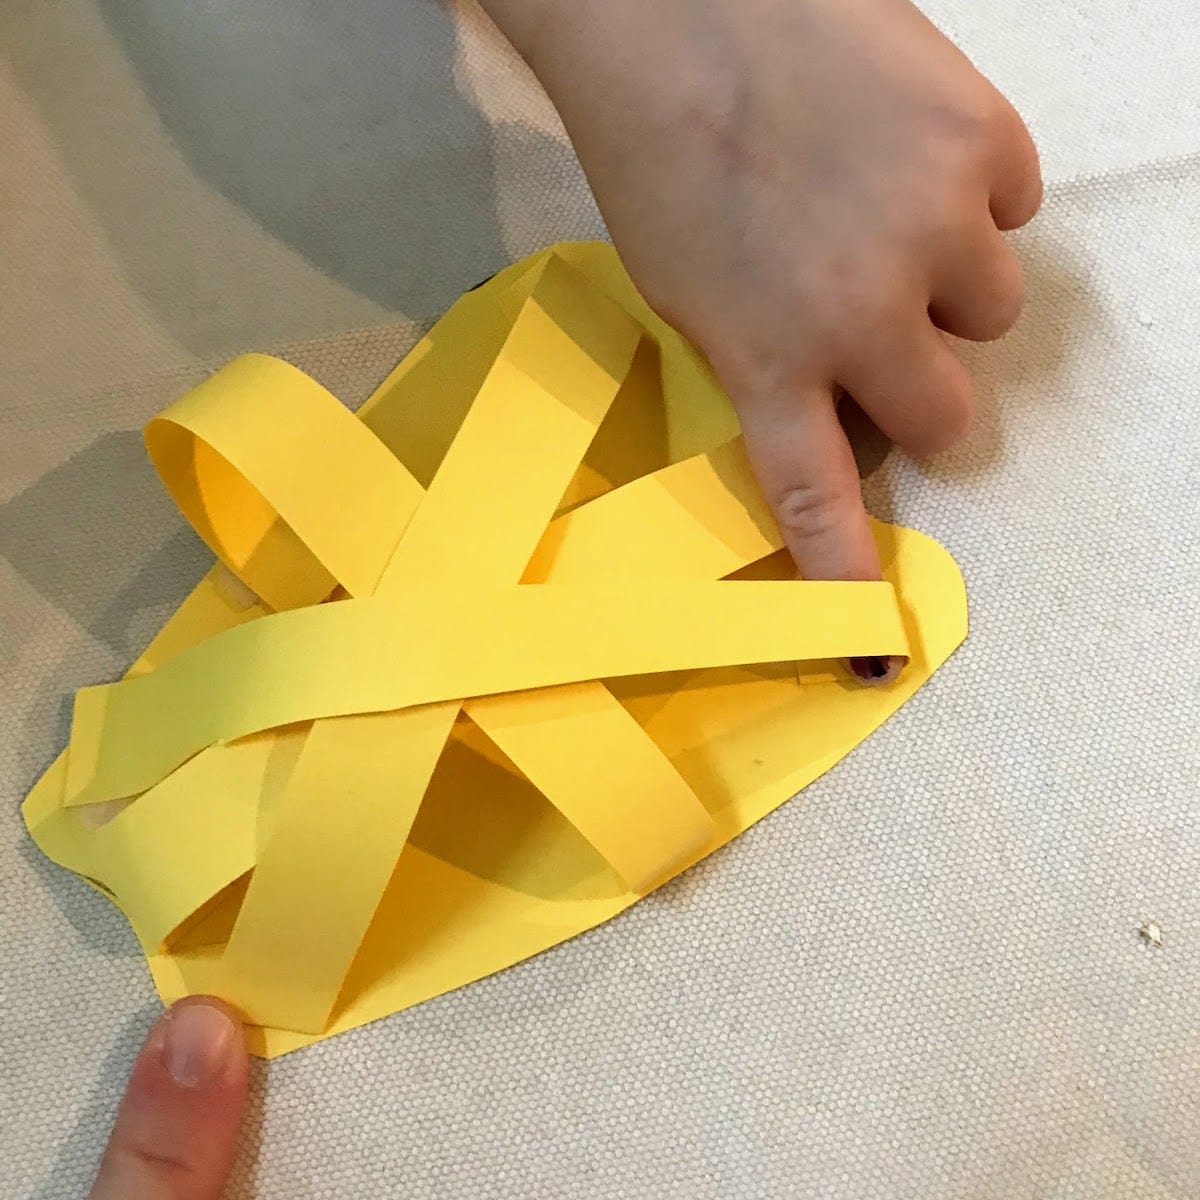 Placing third yellow strip on 3d paper pepper